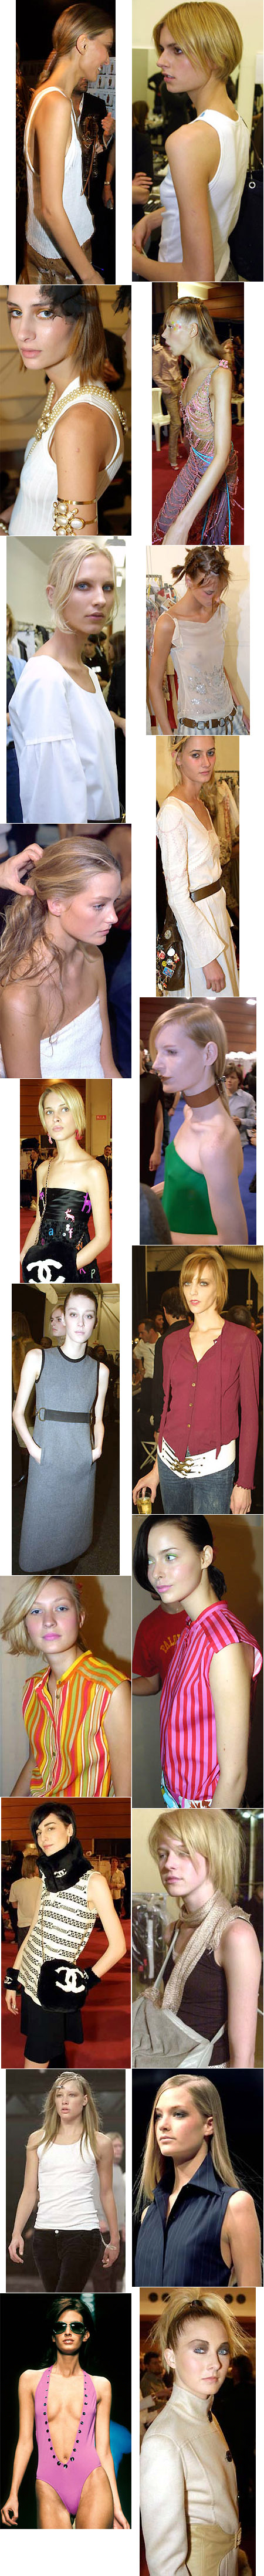 Some examples of the small breasts often seen in high-fashion models.